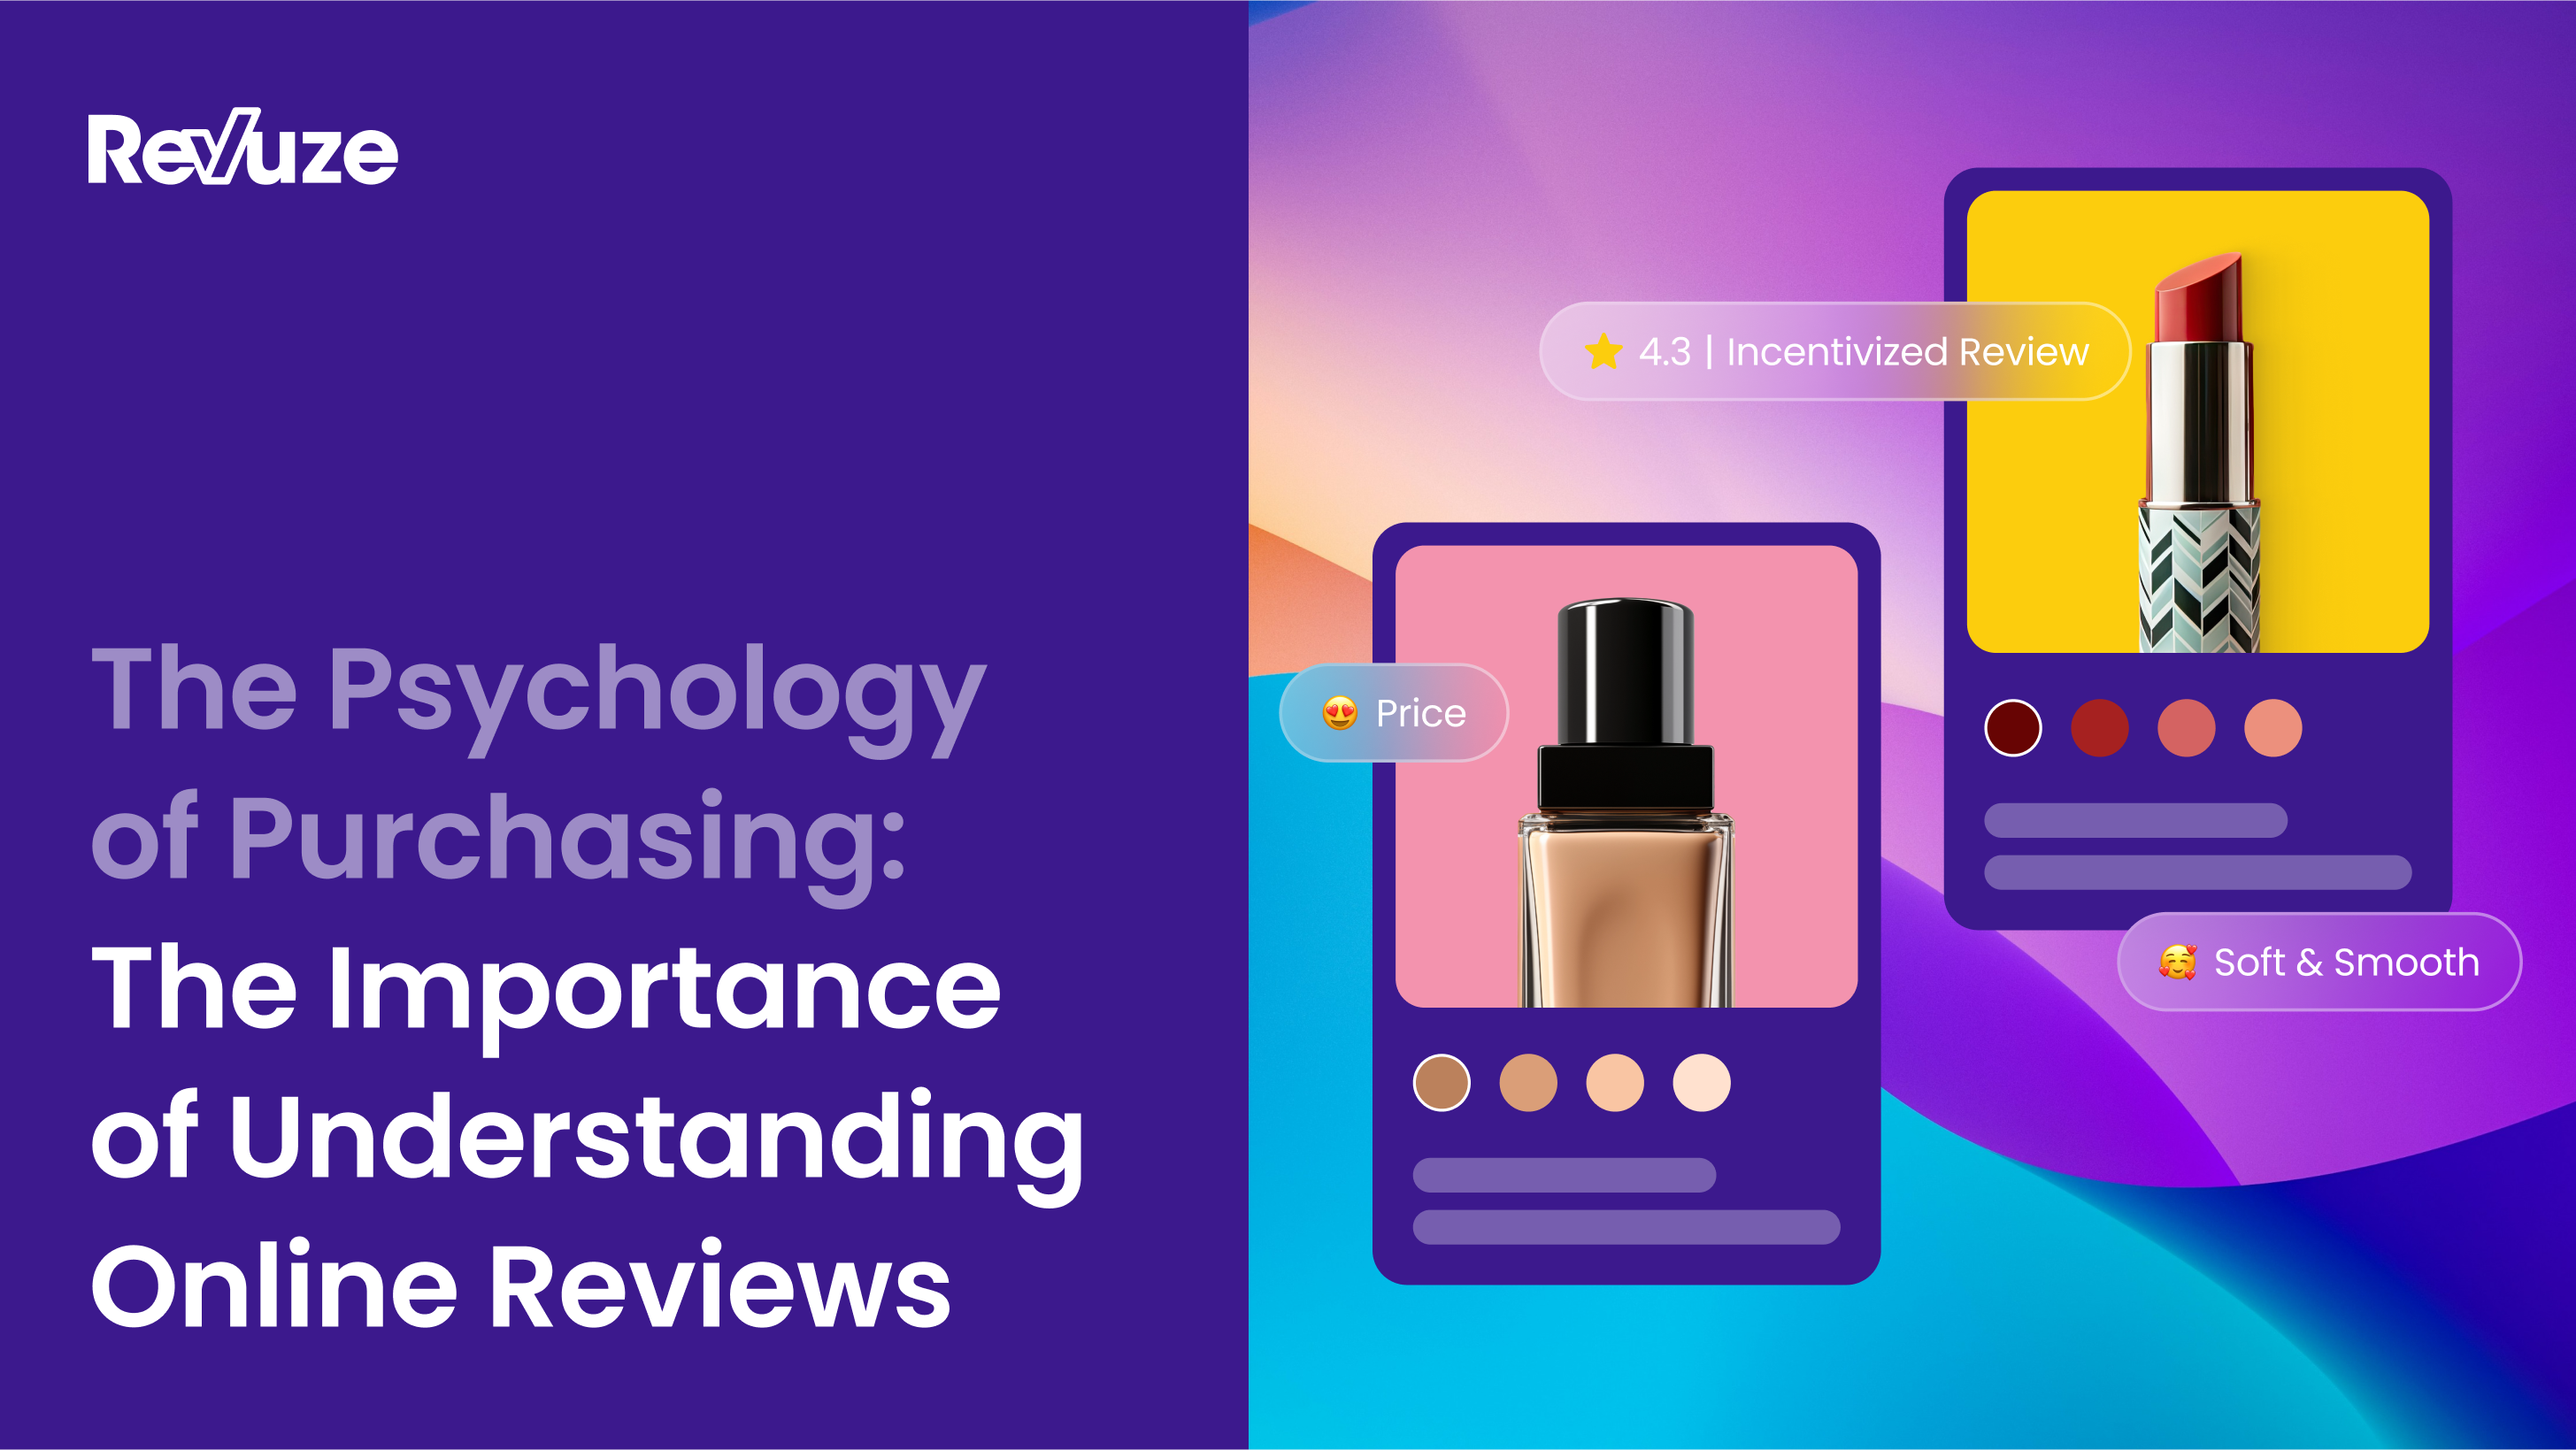 The Psychology of Purchasing: The Importance of Understanding Online Reviews